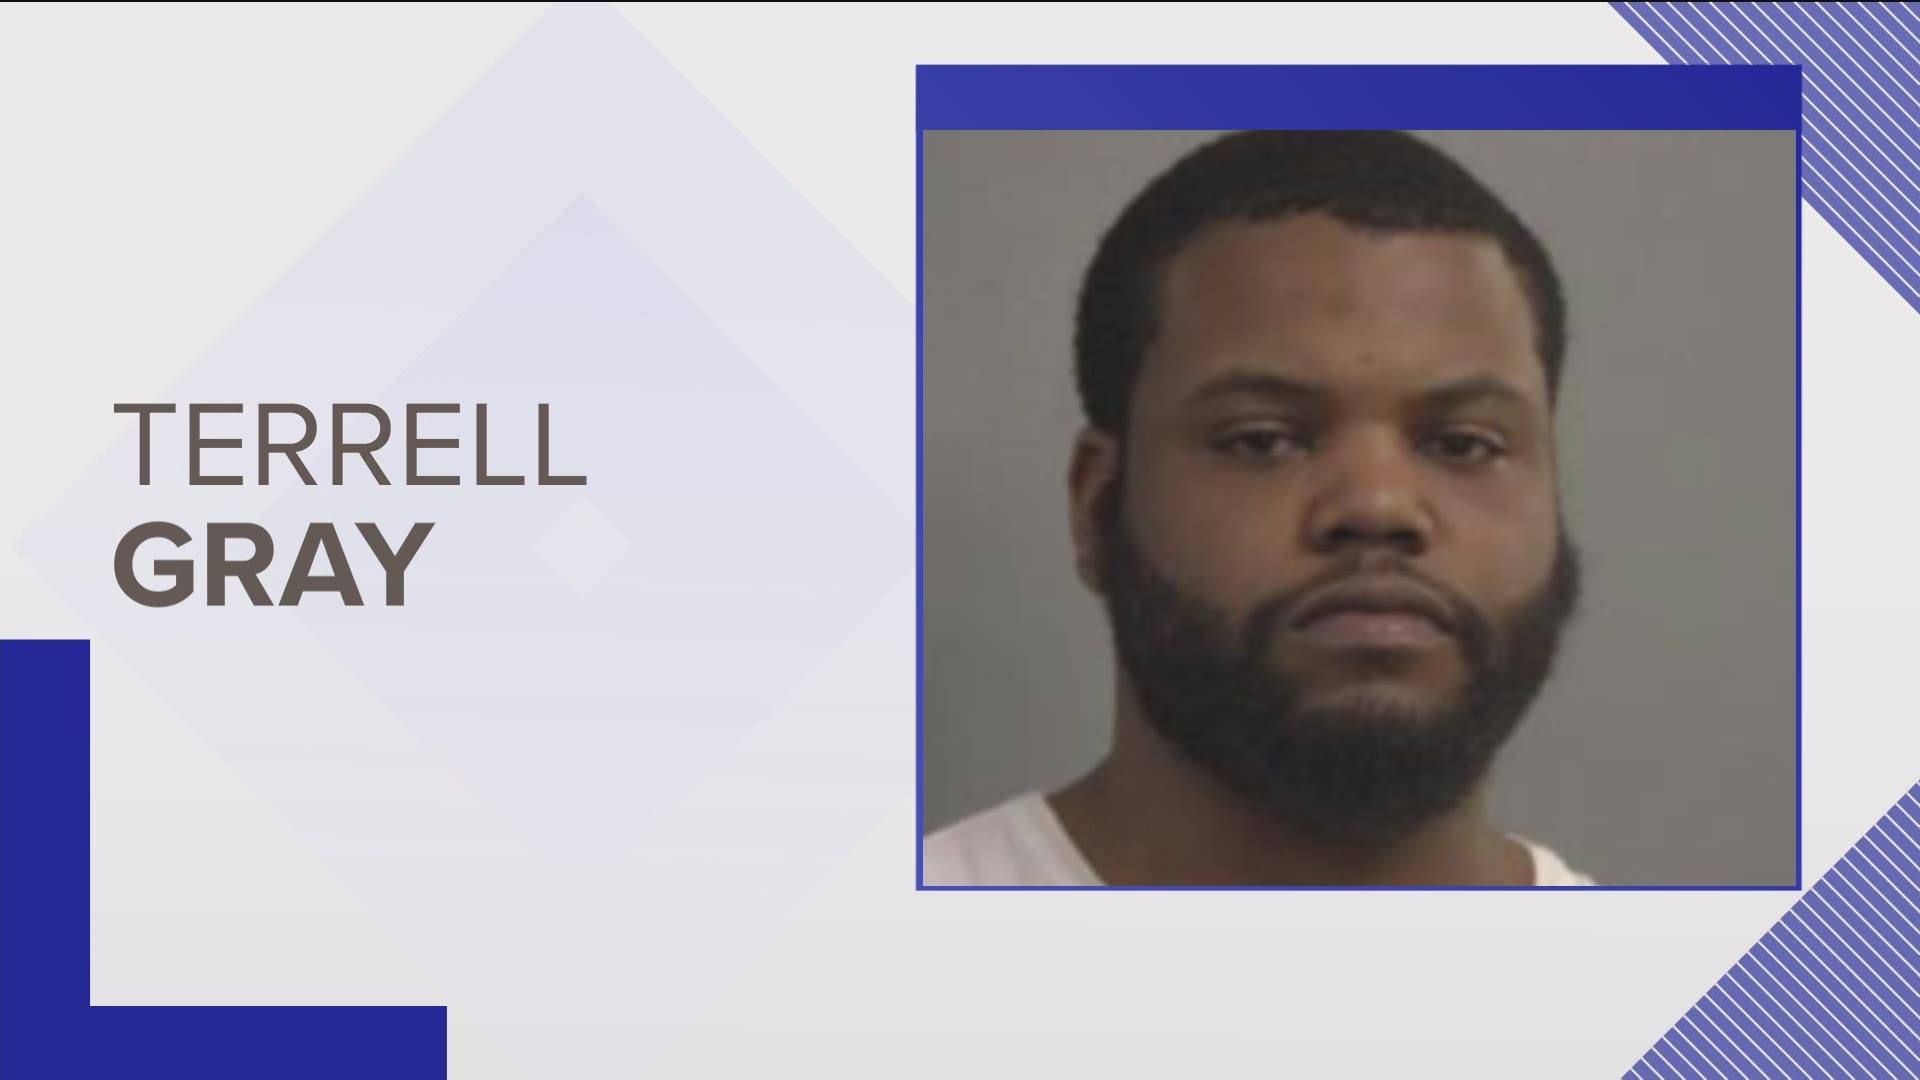 Metro Corrections officials are looking for Terrell Gray, who they say got out of jail by pretending to be someone else.